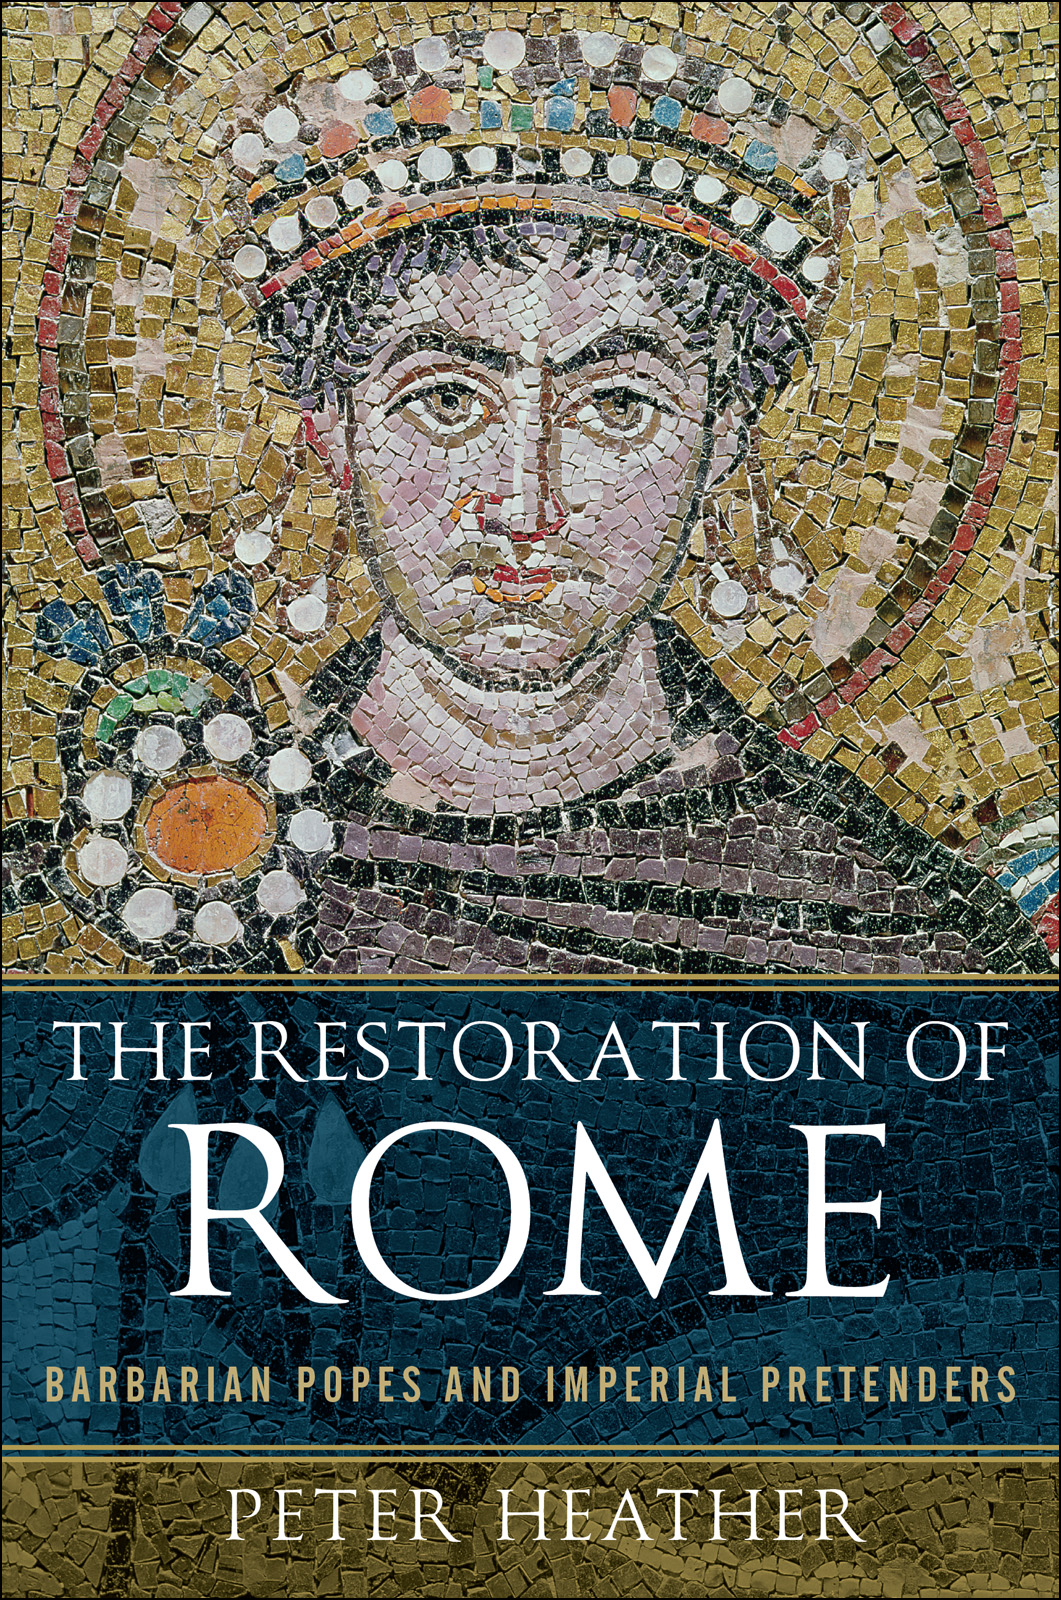 The Restoration of Rome: Barbarian Popes and Imperial Pretenders